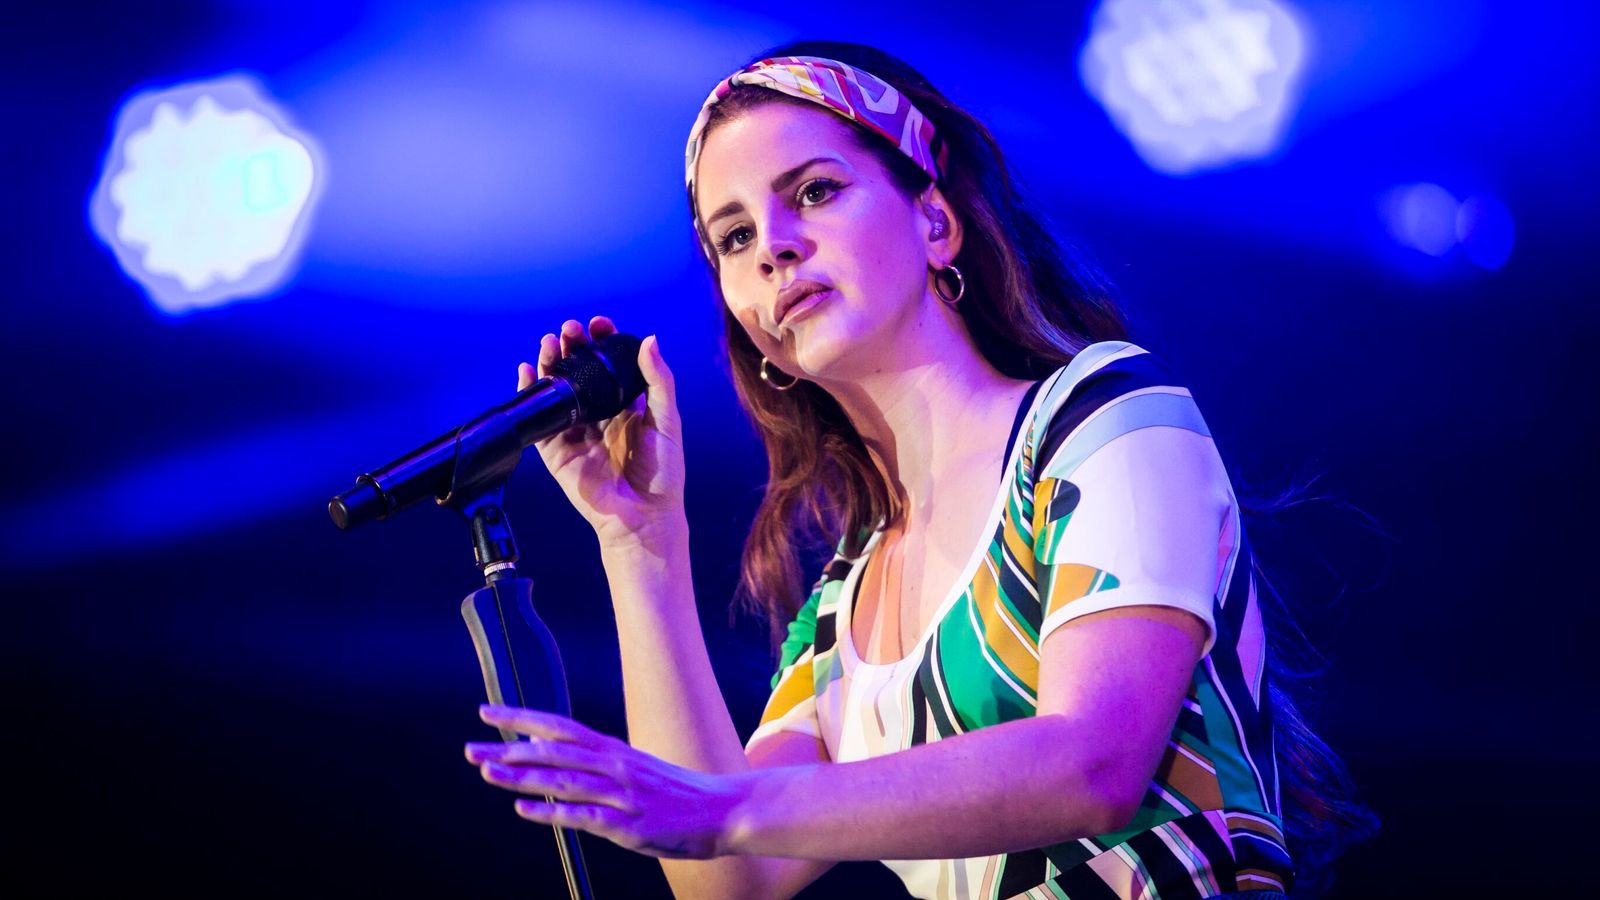 Glastonbury Festival releases new poster after apparent criticism from Lana Del Rey